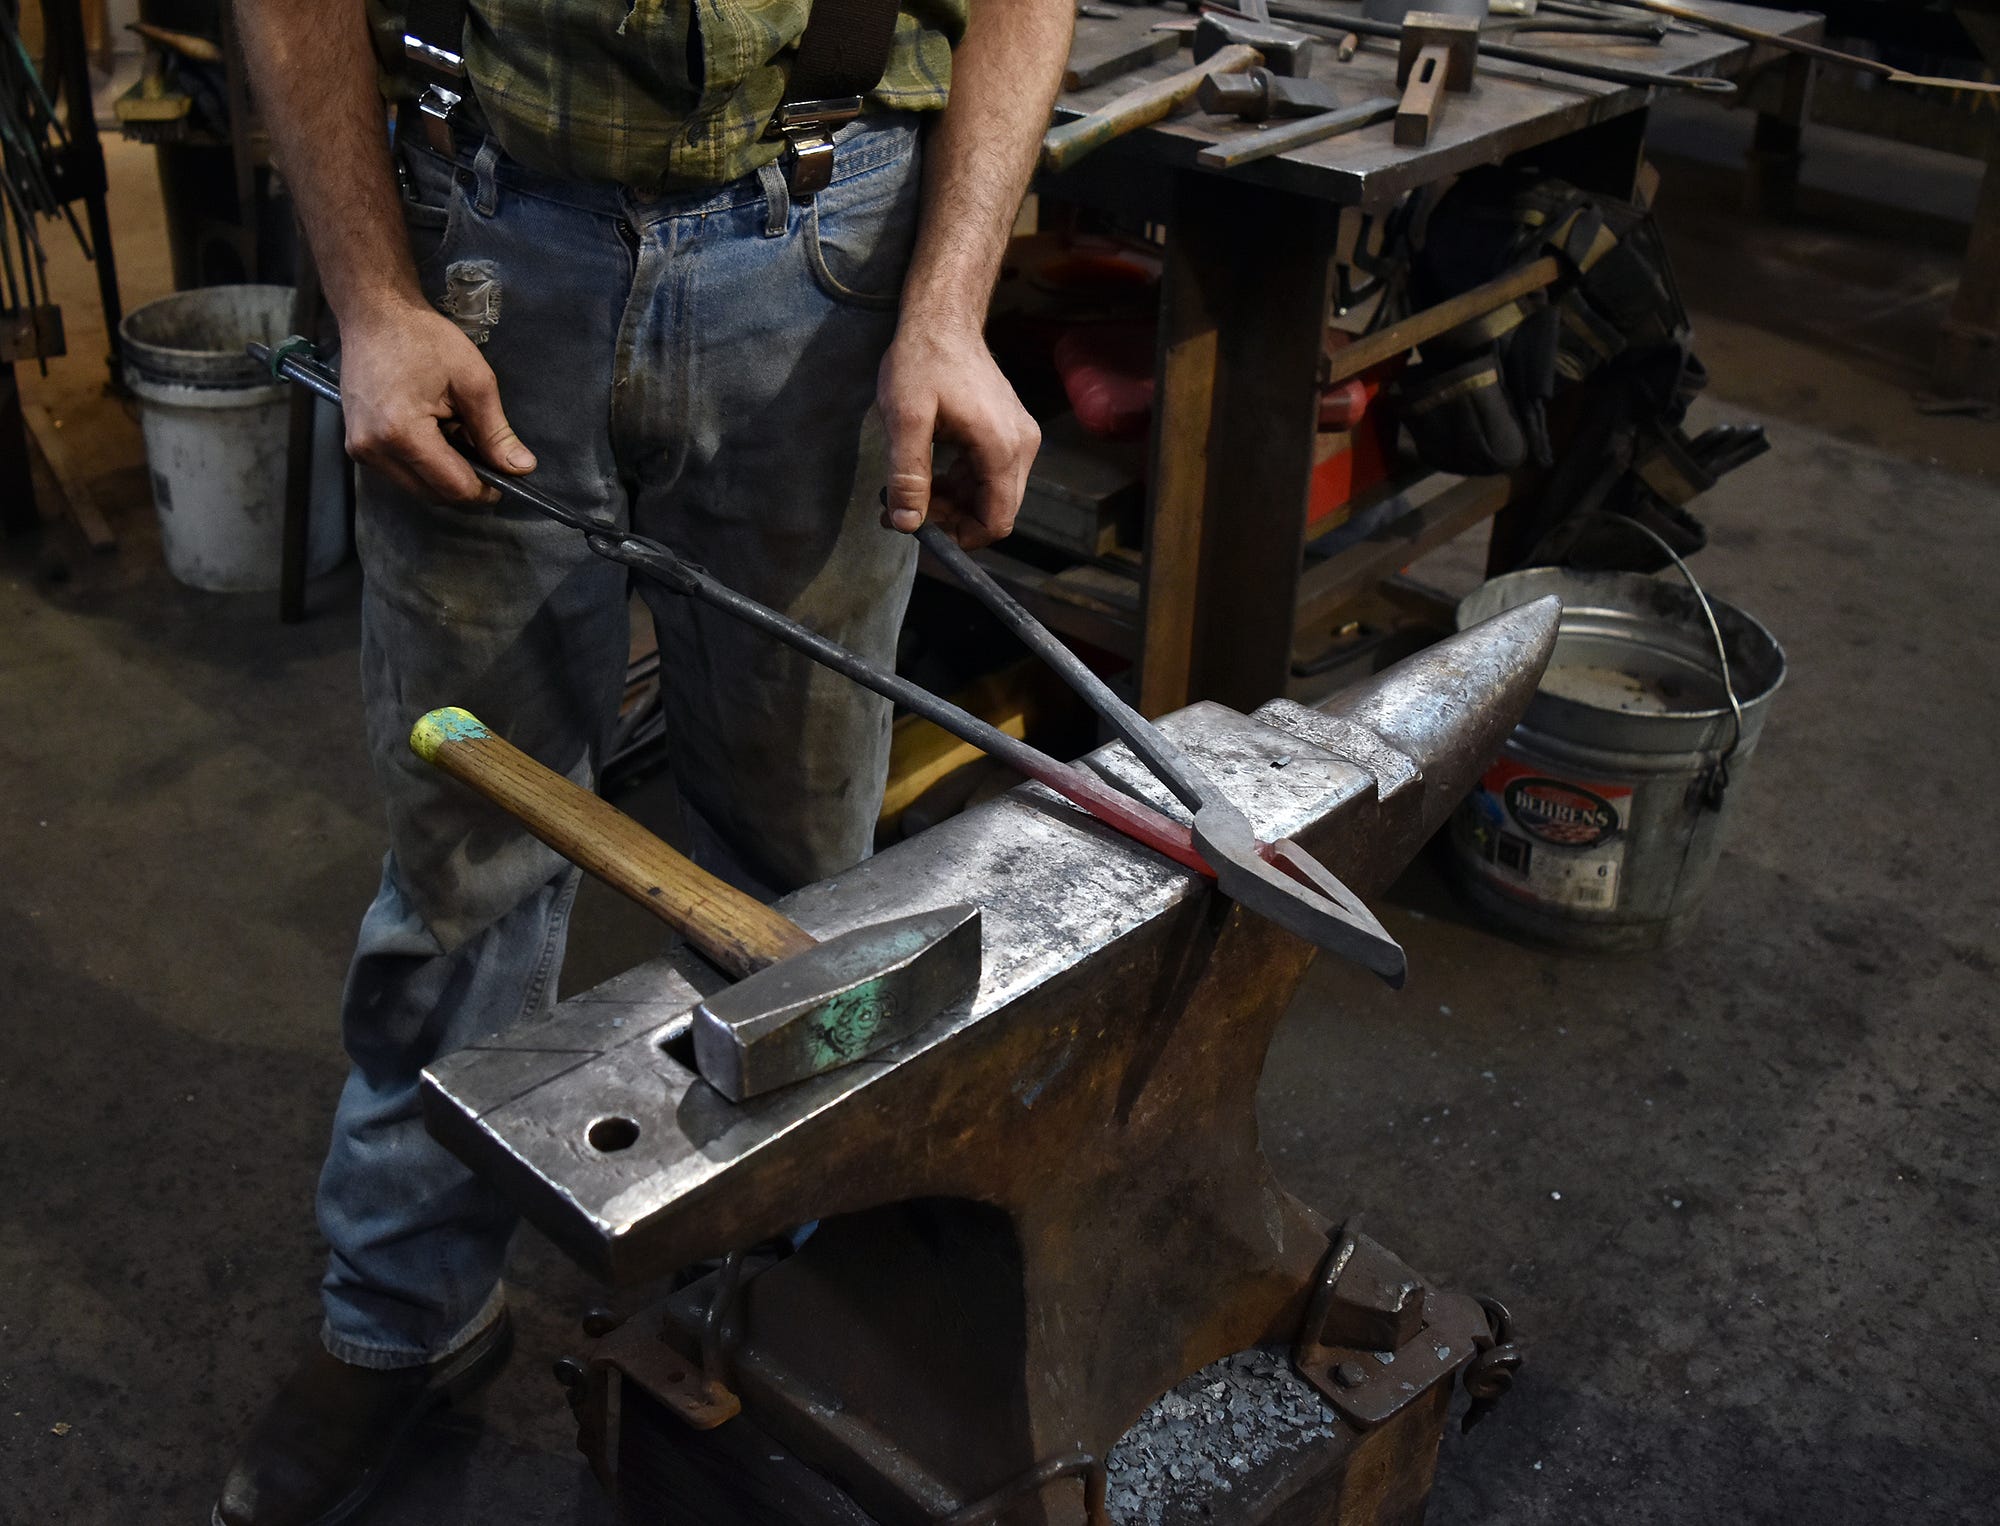 Blacksmithing is alive and well in Alabama